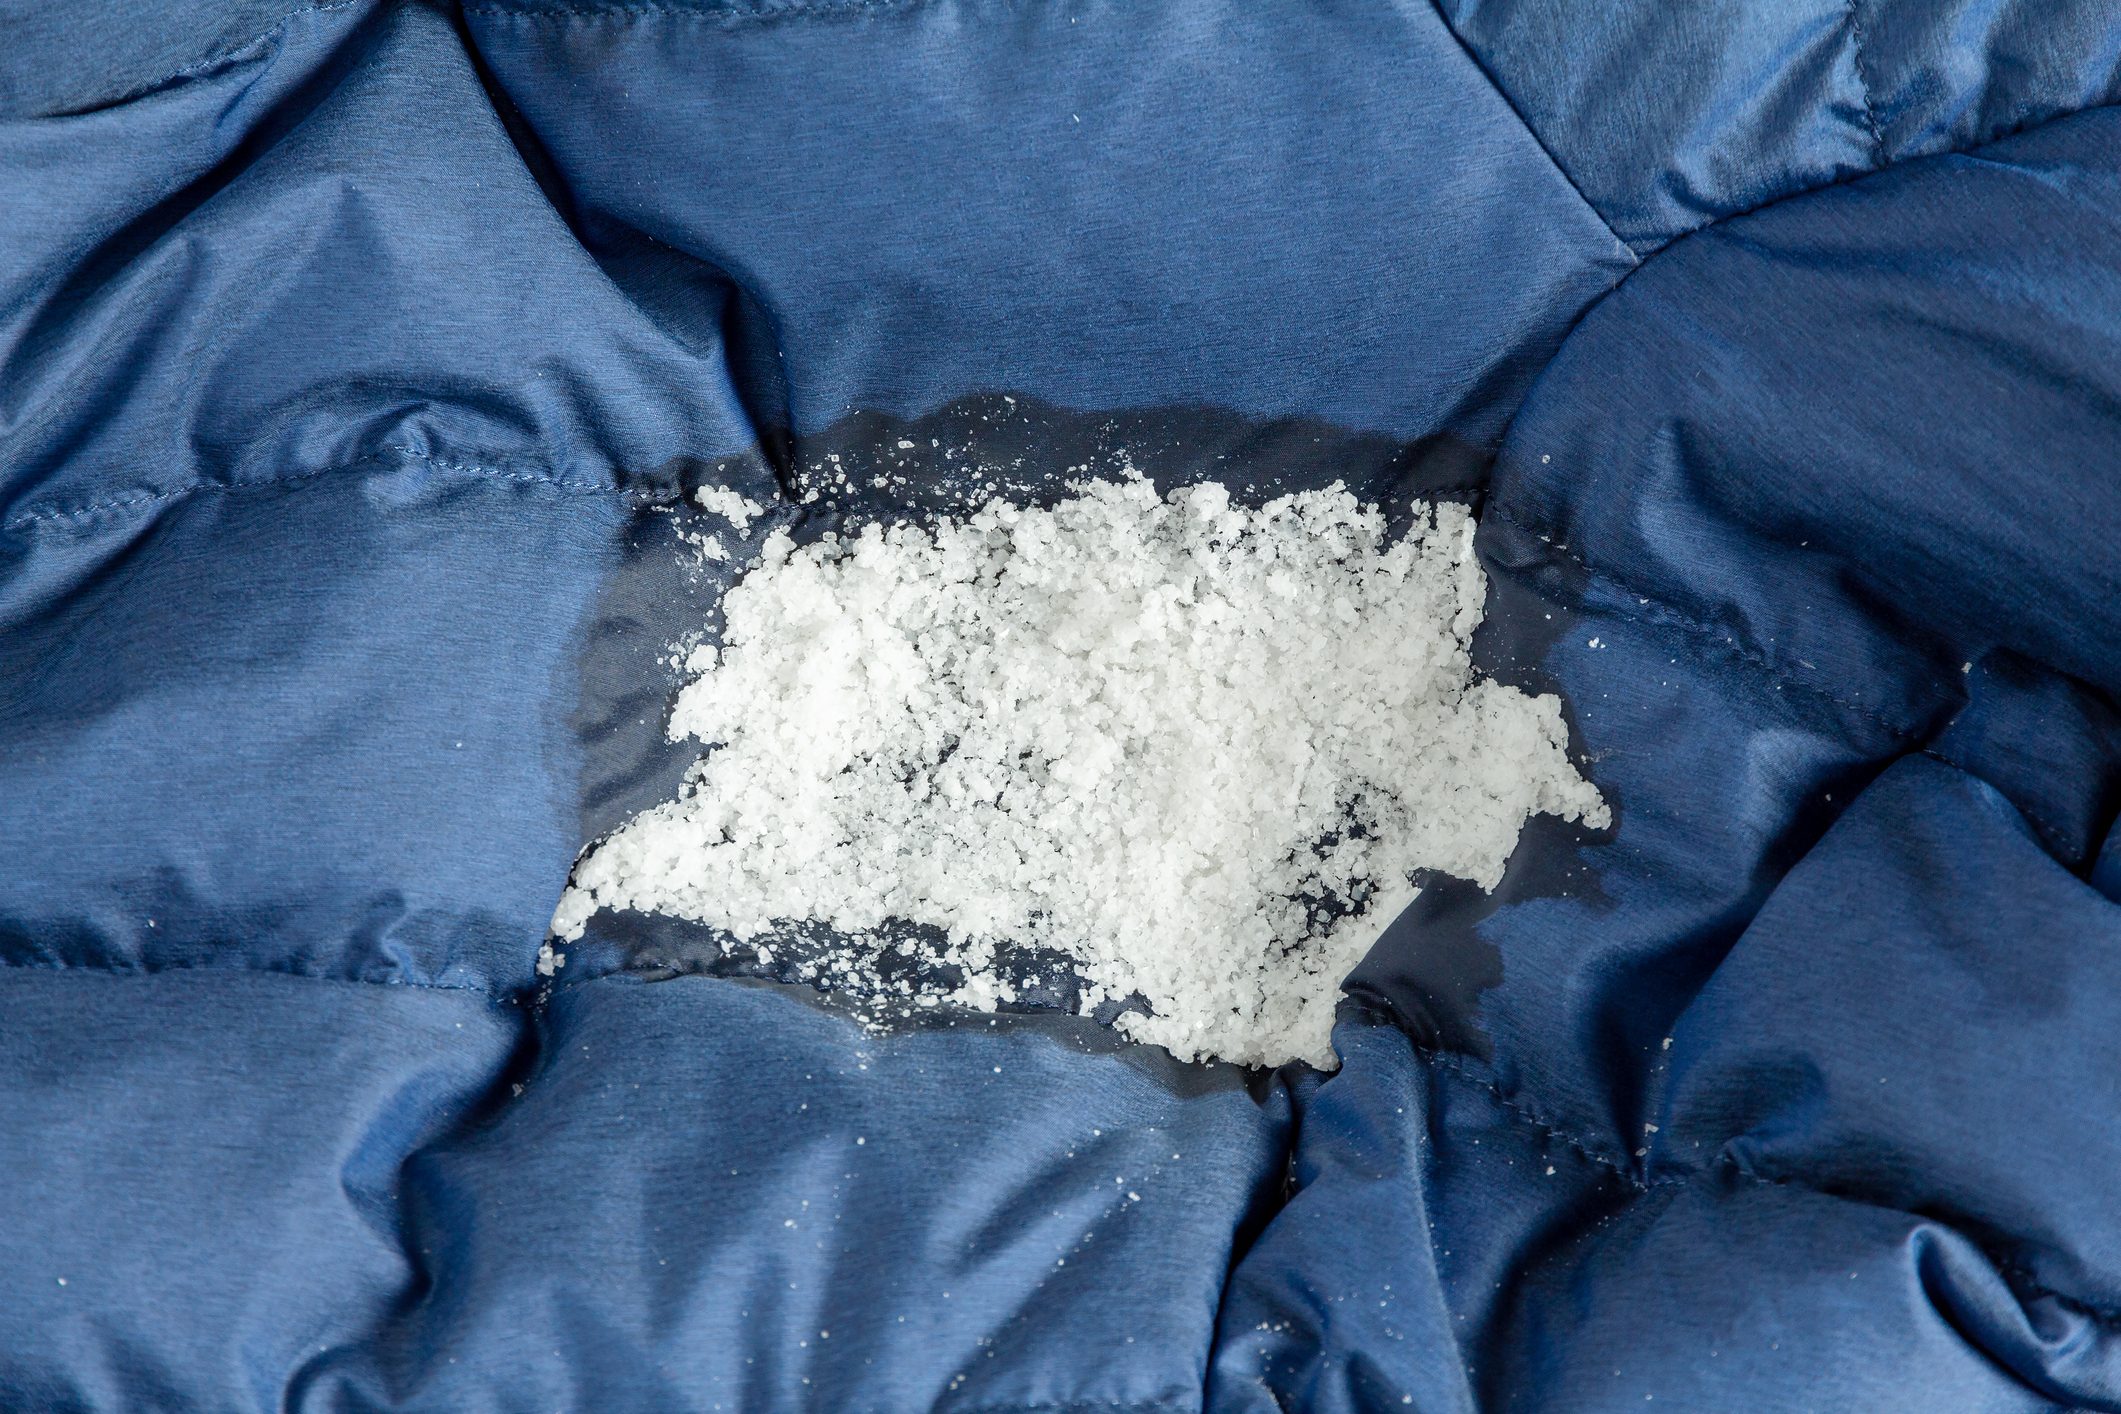 Crystals of edible salt on the fabric of a jacket to remove dirty oil stains